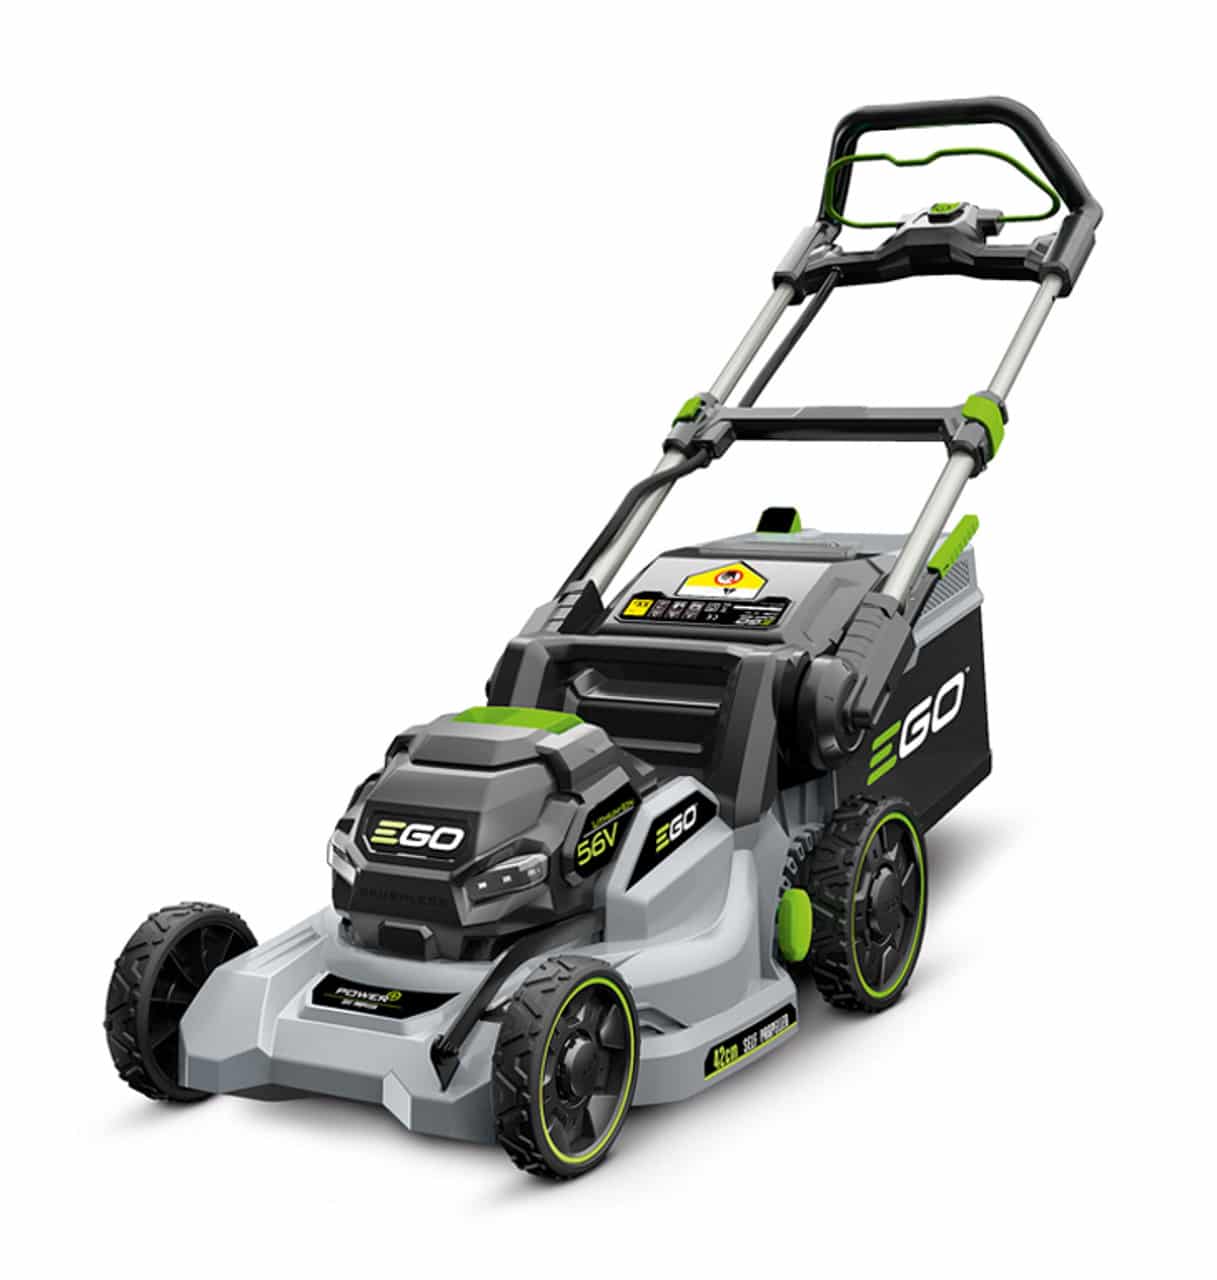 EGO Power+ LM1701E 42cm 56V Cordless Lawn Mower with Battery & Charger 6685